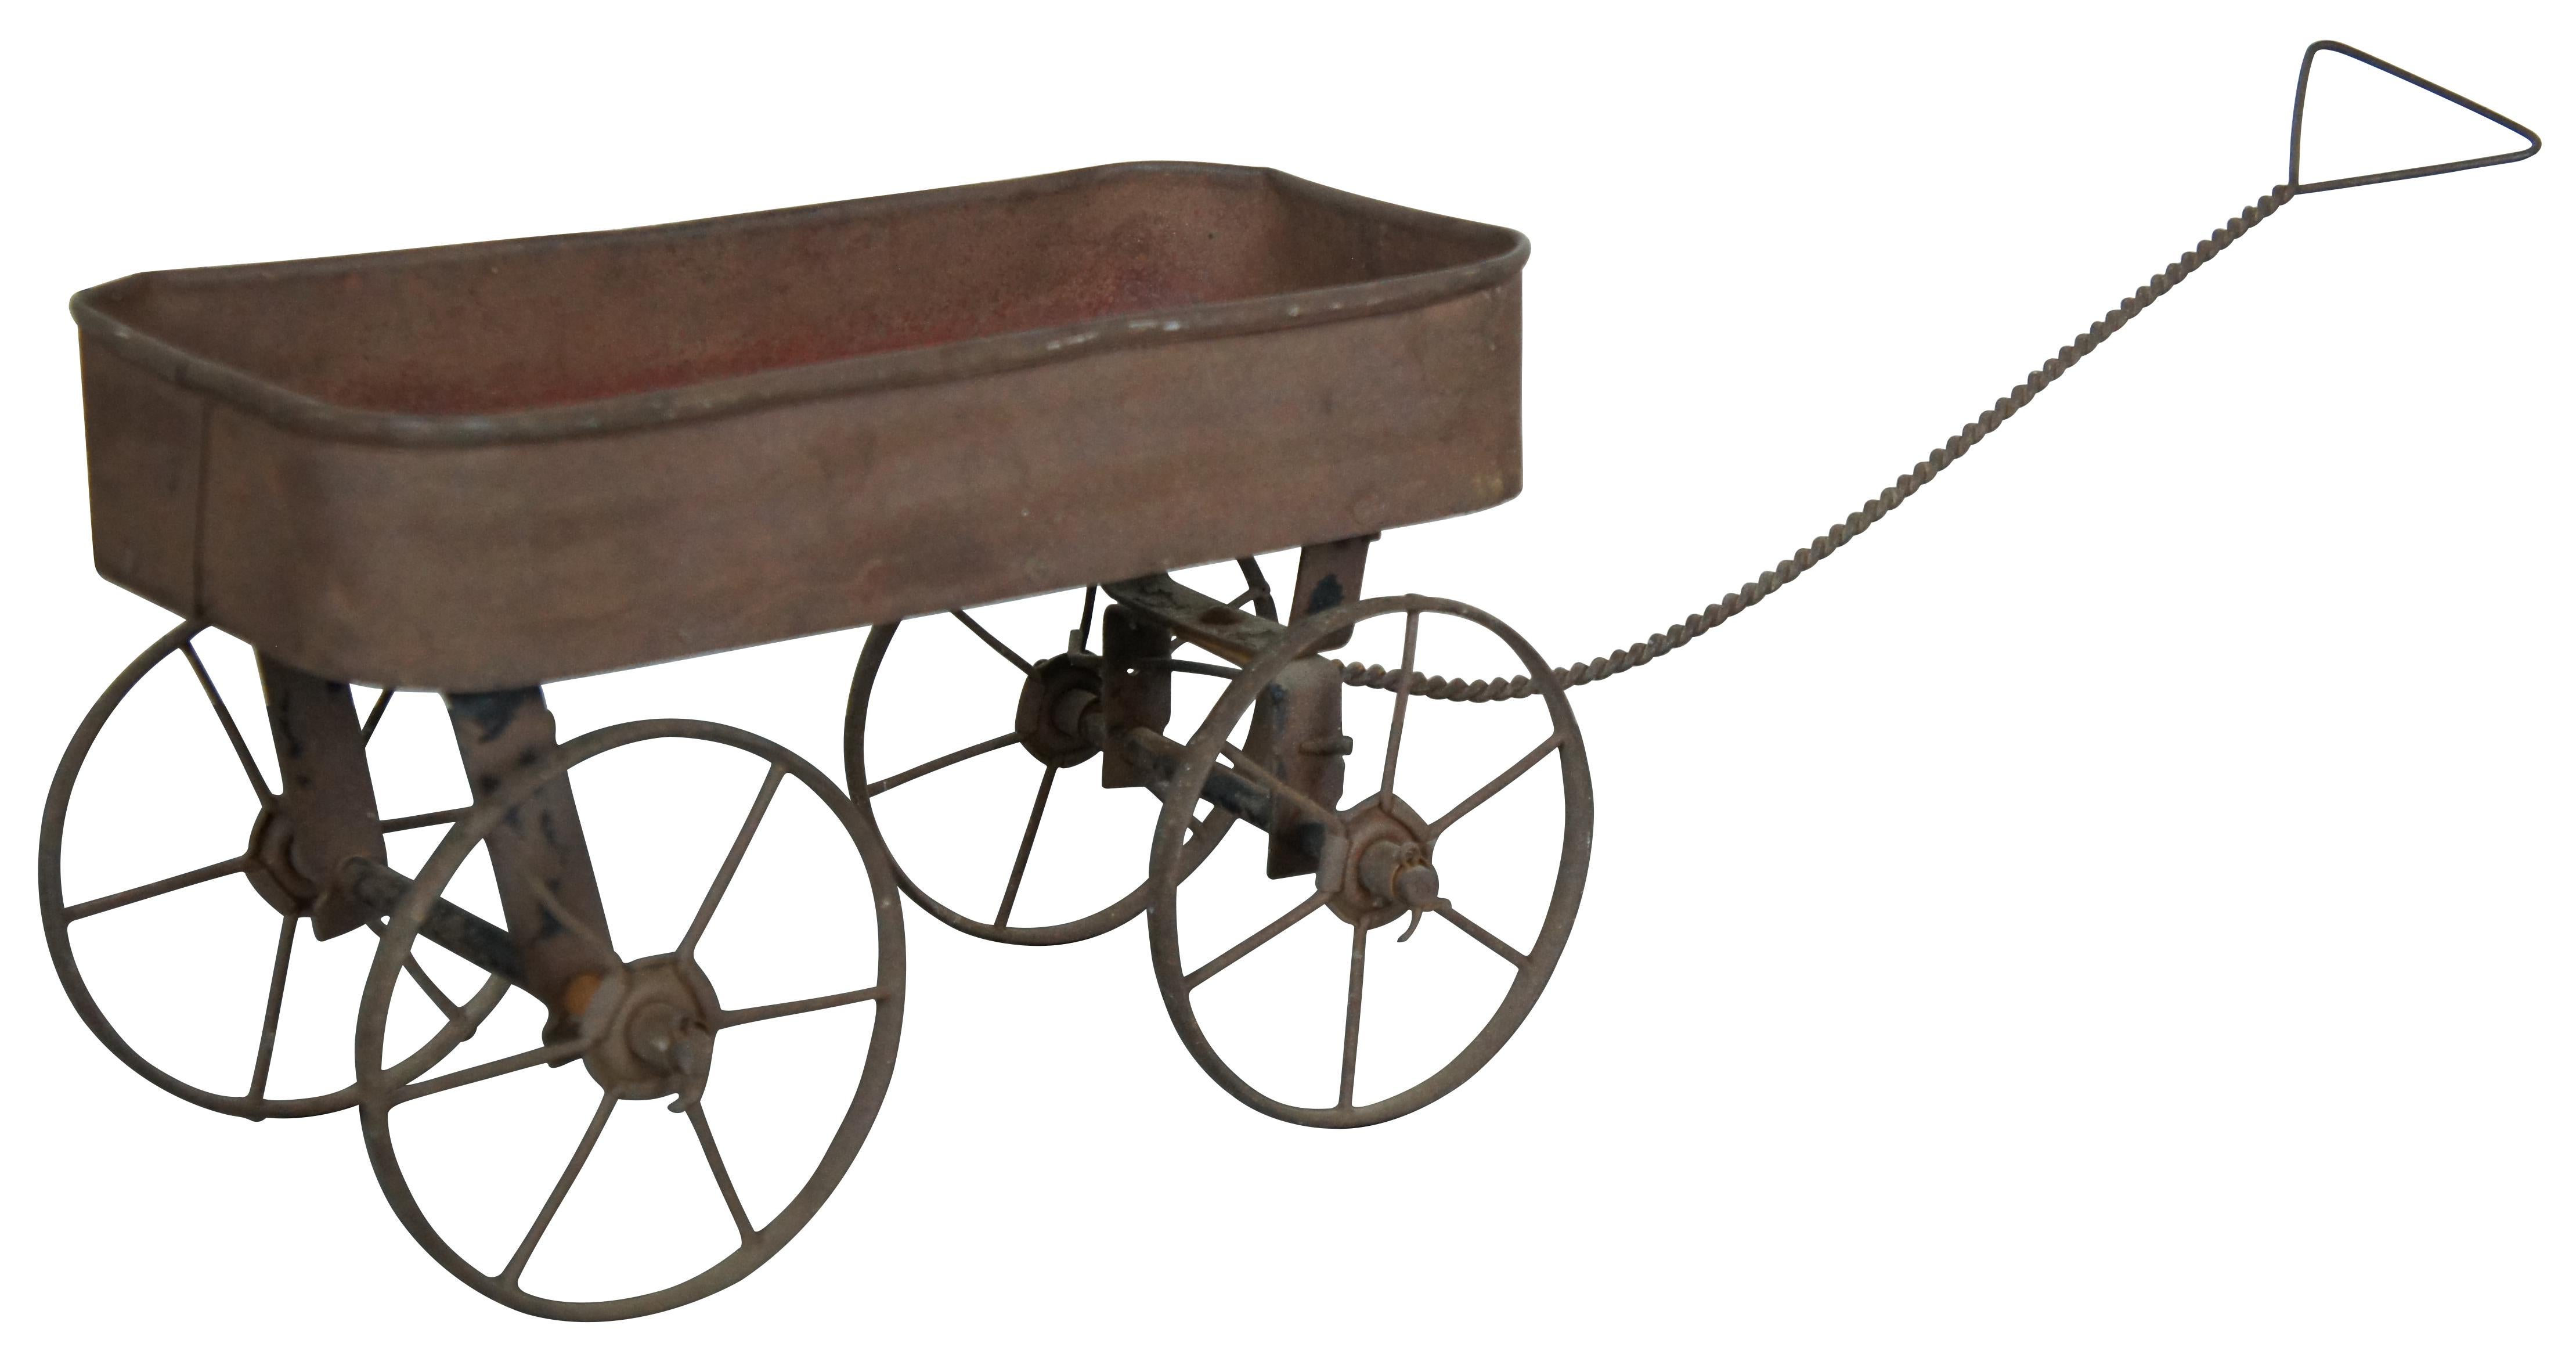 Antique 19th century folk art child’s doll sized farmhouse wagon or cart with metal body, wood base, twisted wire handle, and metal wheels, the front axle of which rotates in all directions.

13” x 6.25” x 8”, Handle Length – 17”